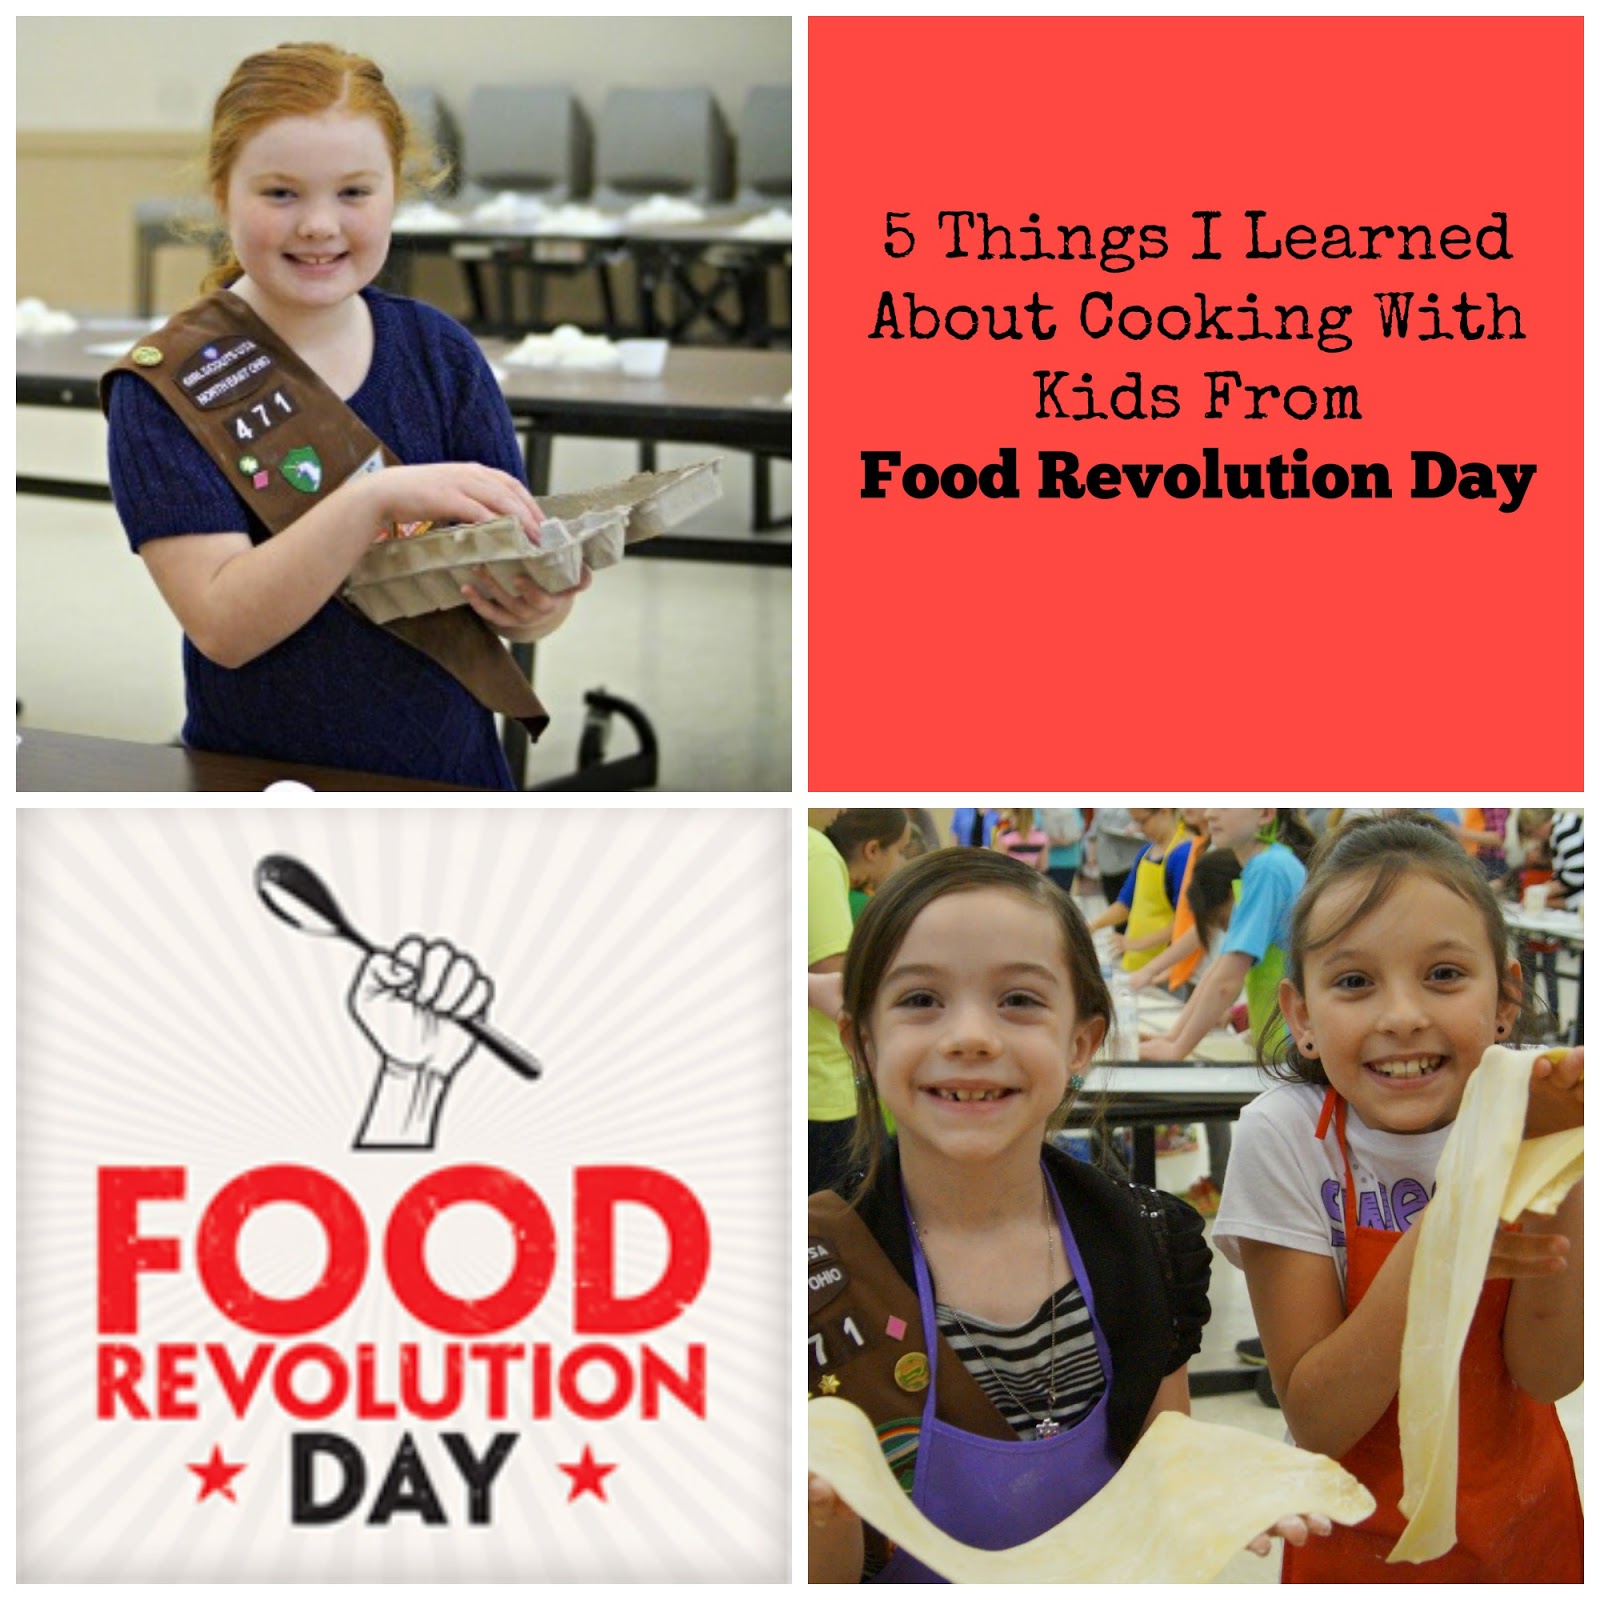 5 Things I Learned About Cooking With Kids From Food Revolution Day